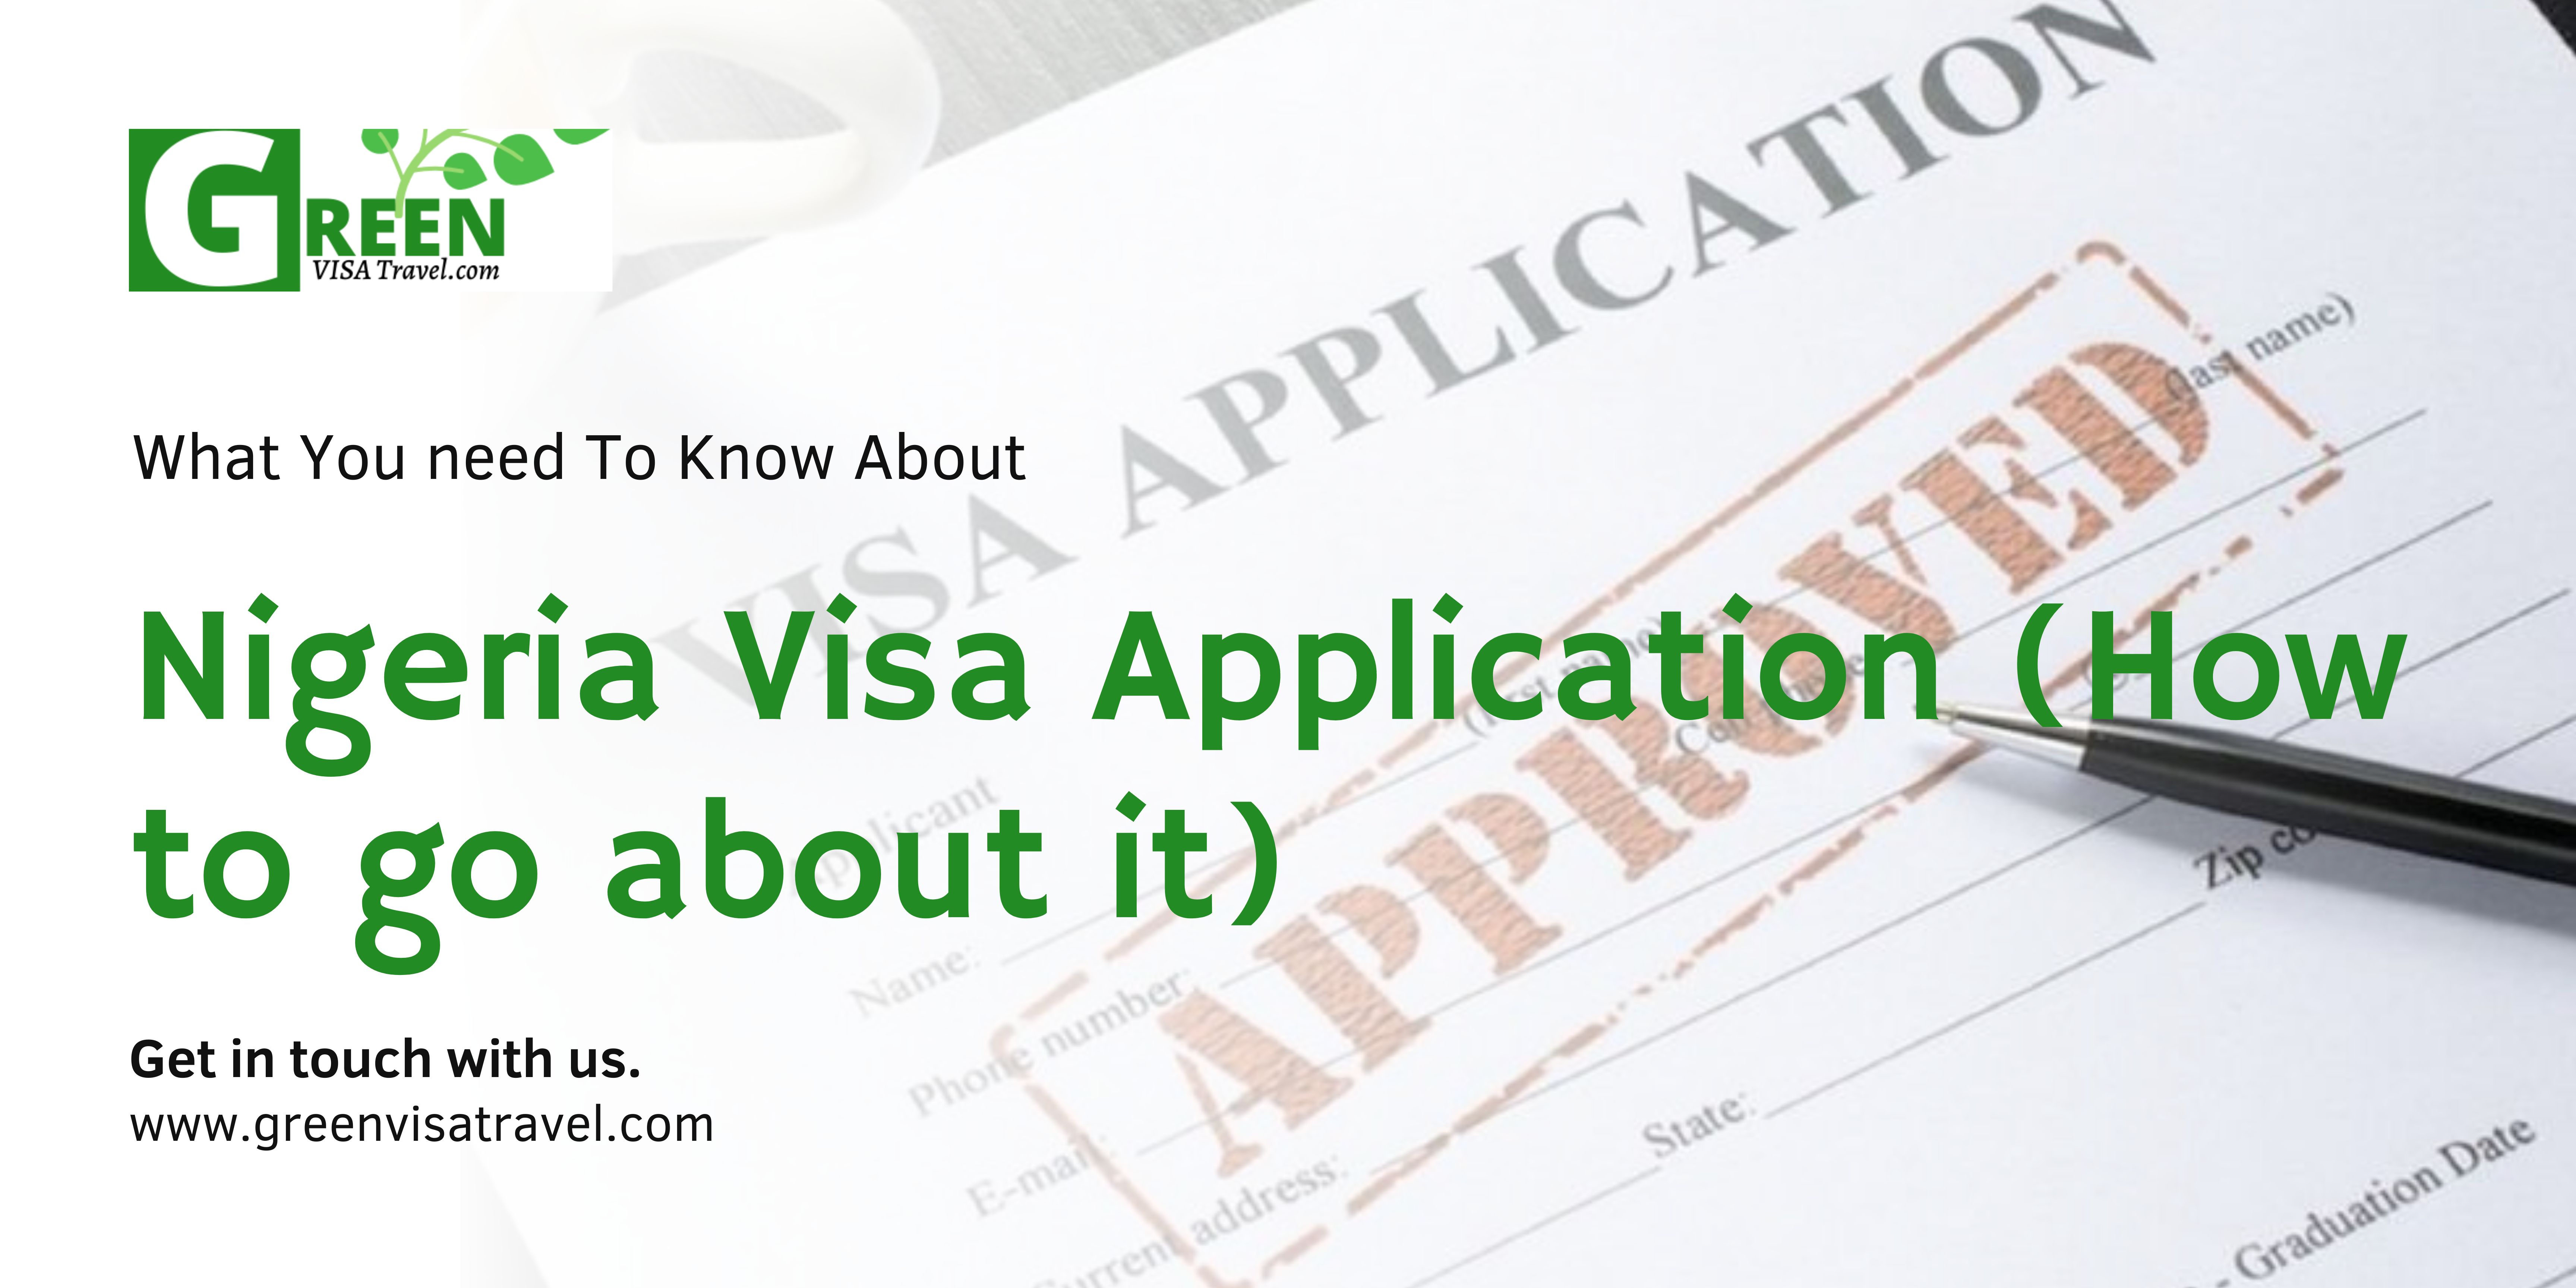 Nigeria Visa Application (How to go about it)